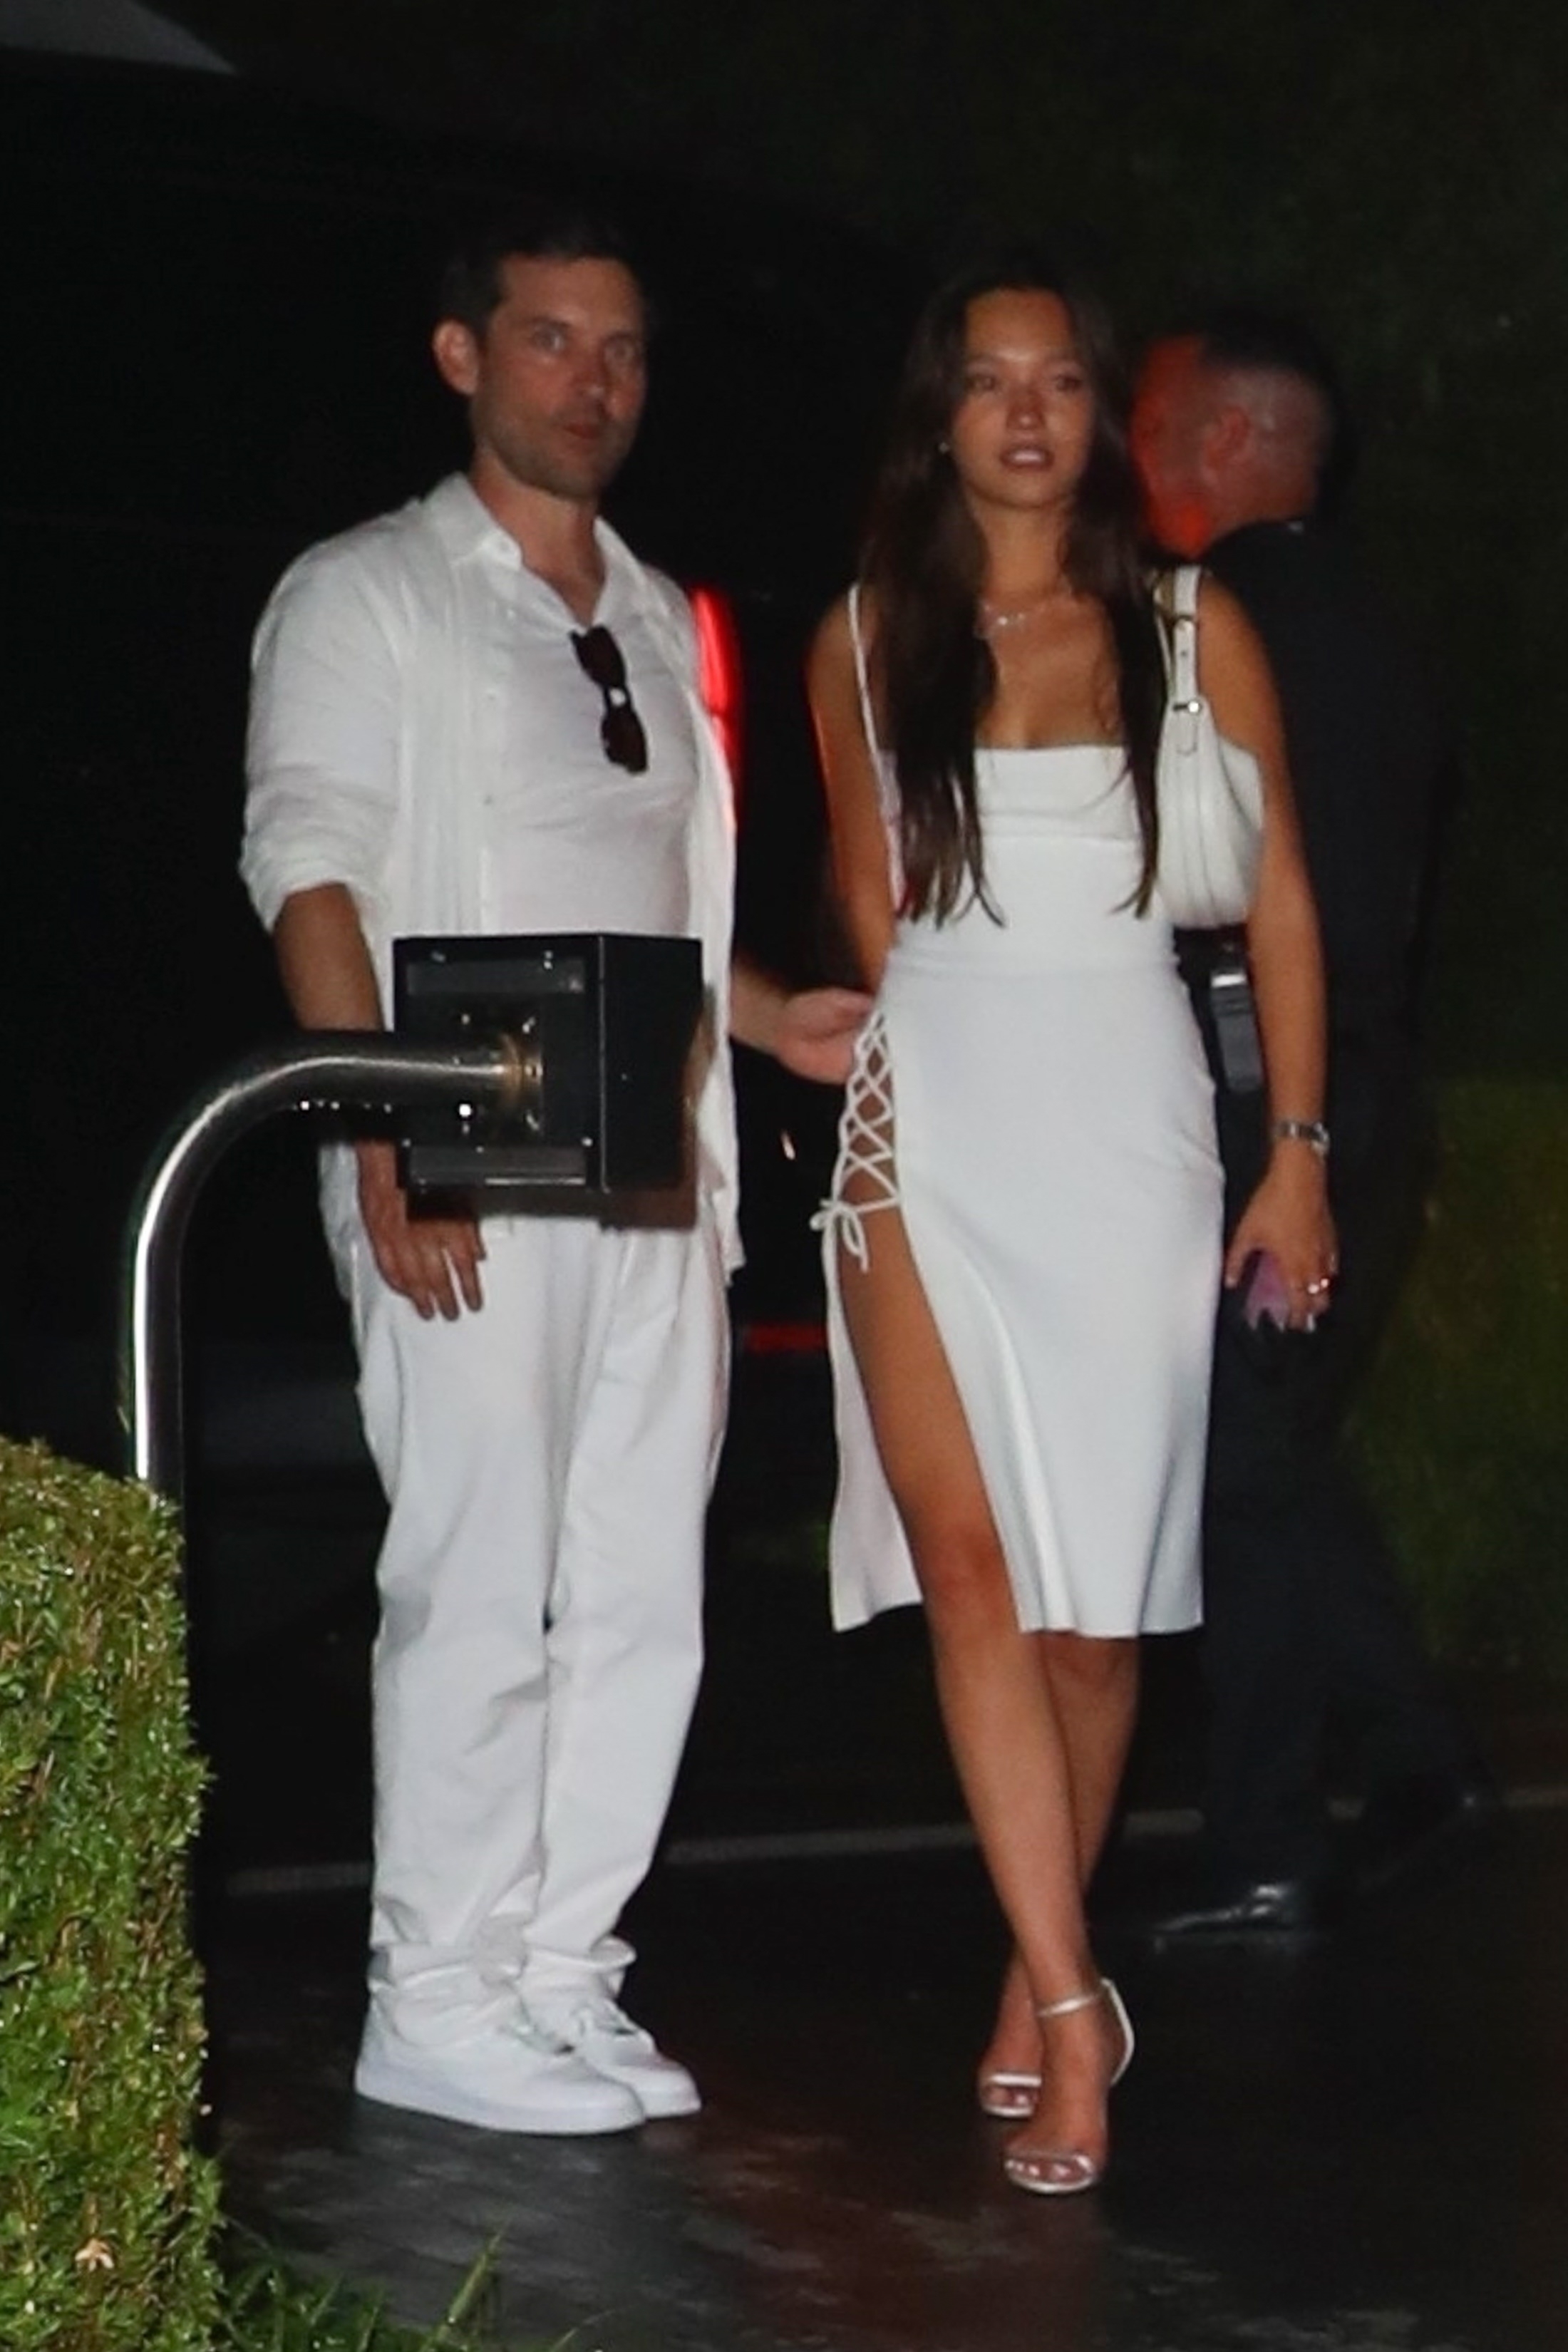 Earlier this summer, Tobey Maguire attended Michael Rubin's white party in New York City